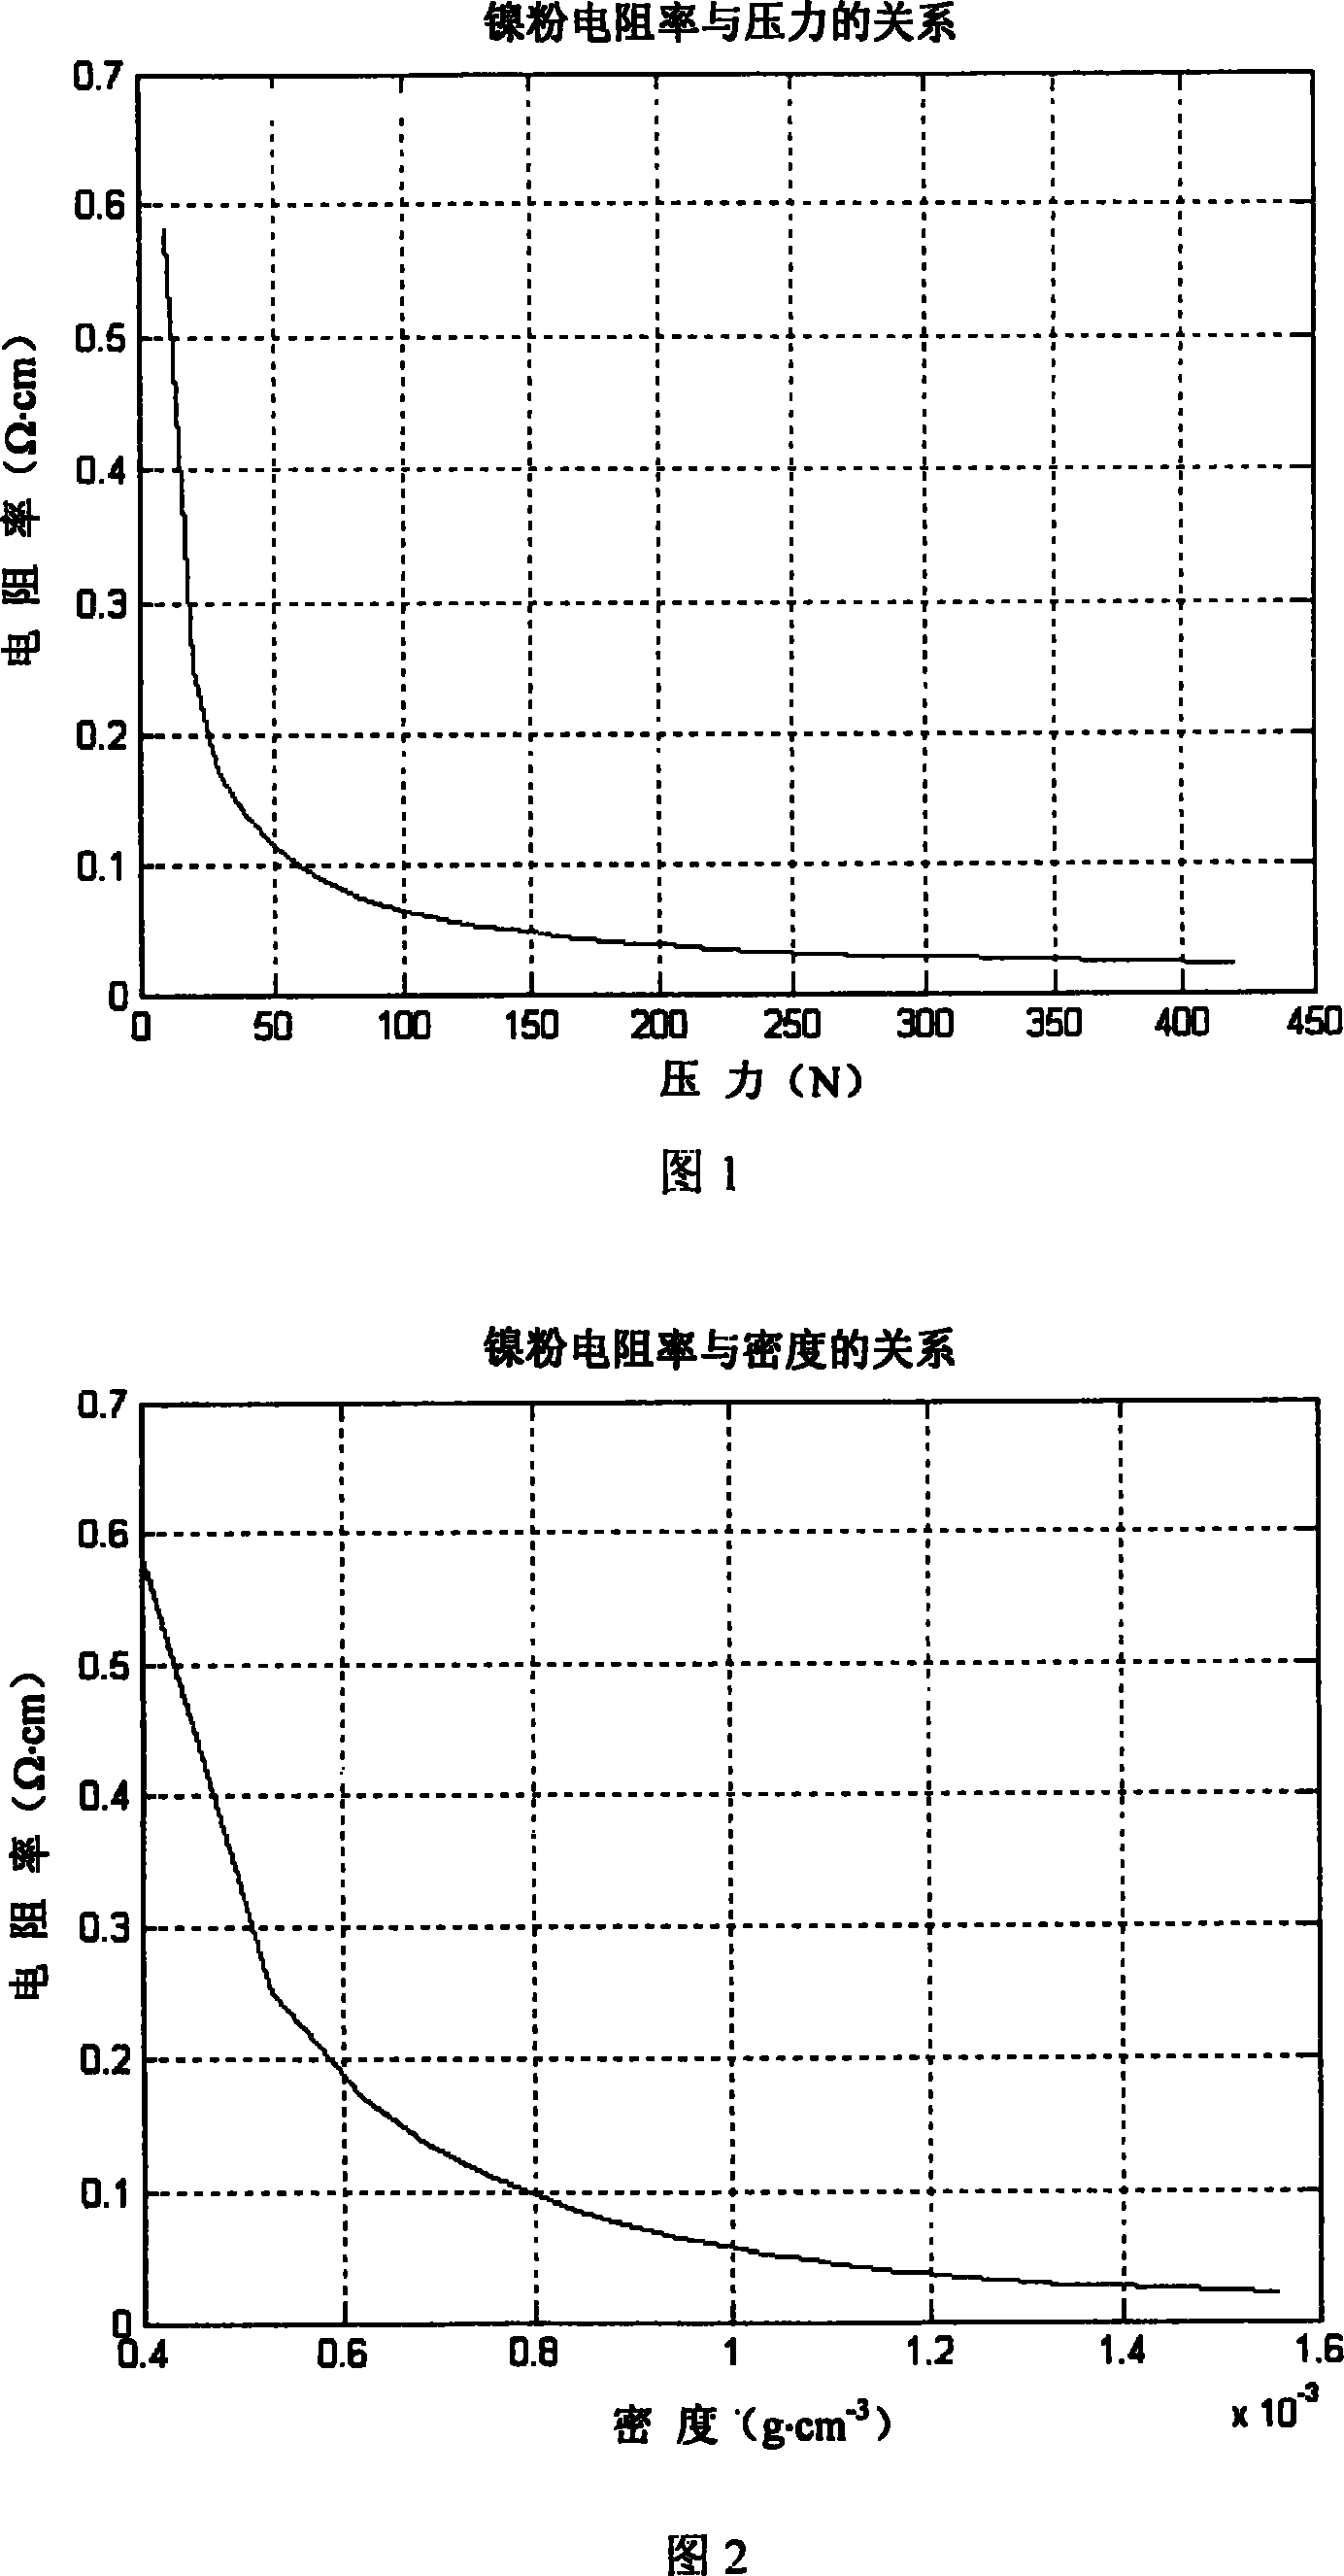 Method and device for investingating resistivity of powder metal